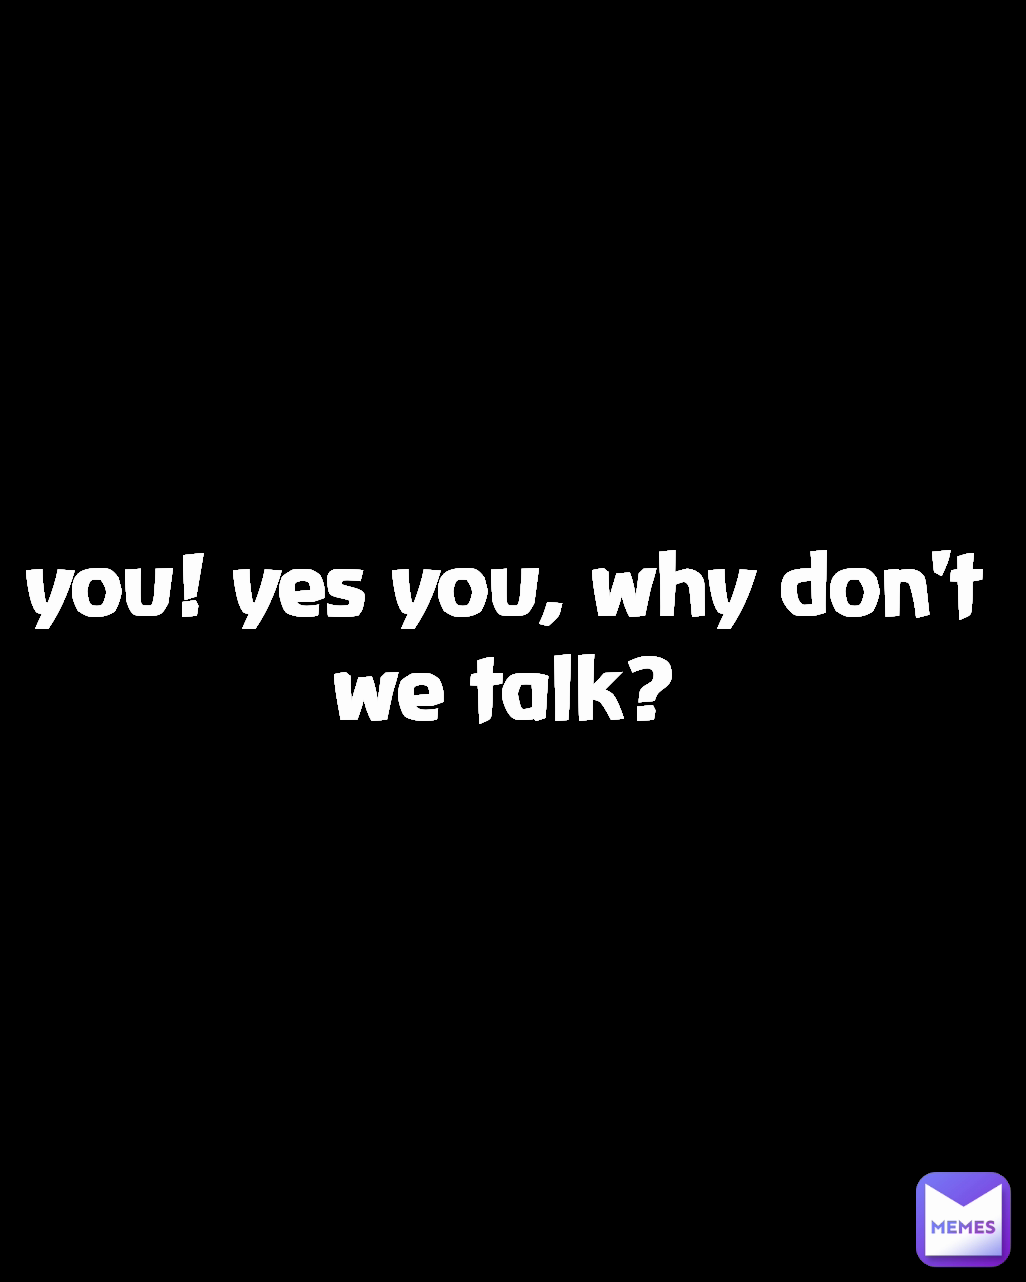 you! yes you, why don't we talk?